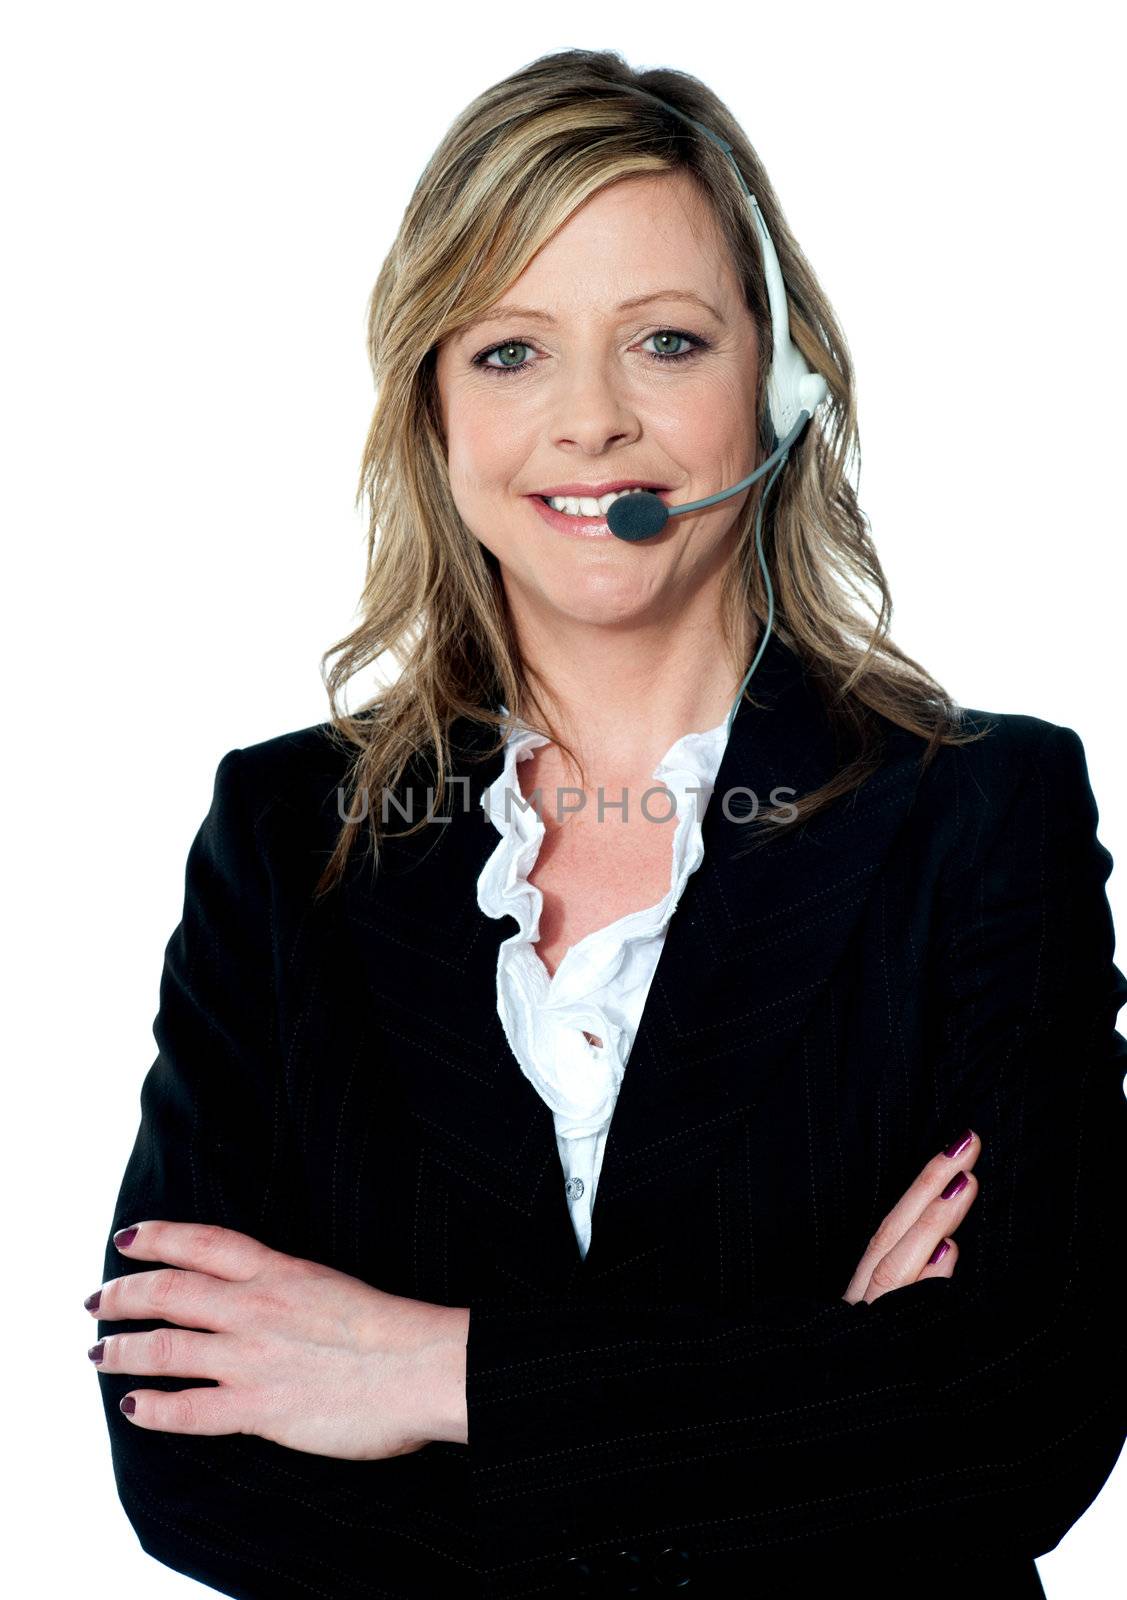 Customer care executive posing with headsets on